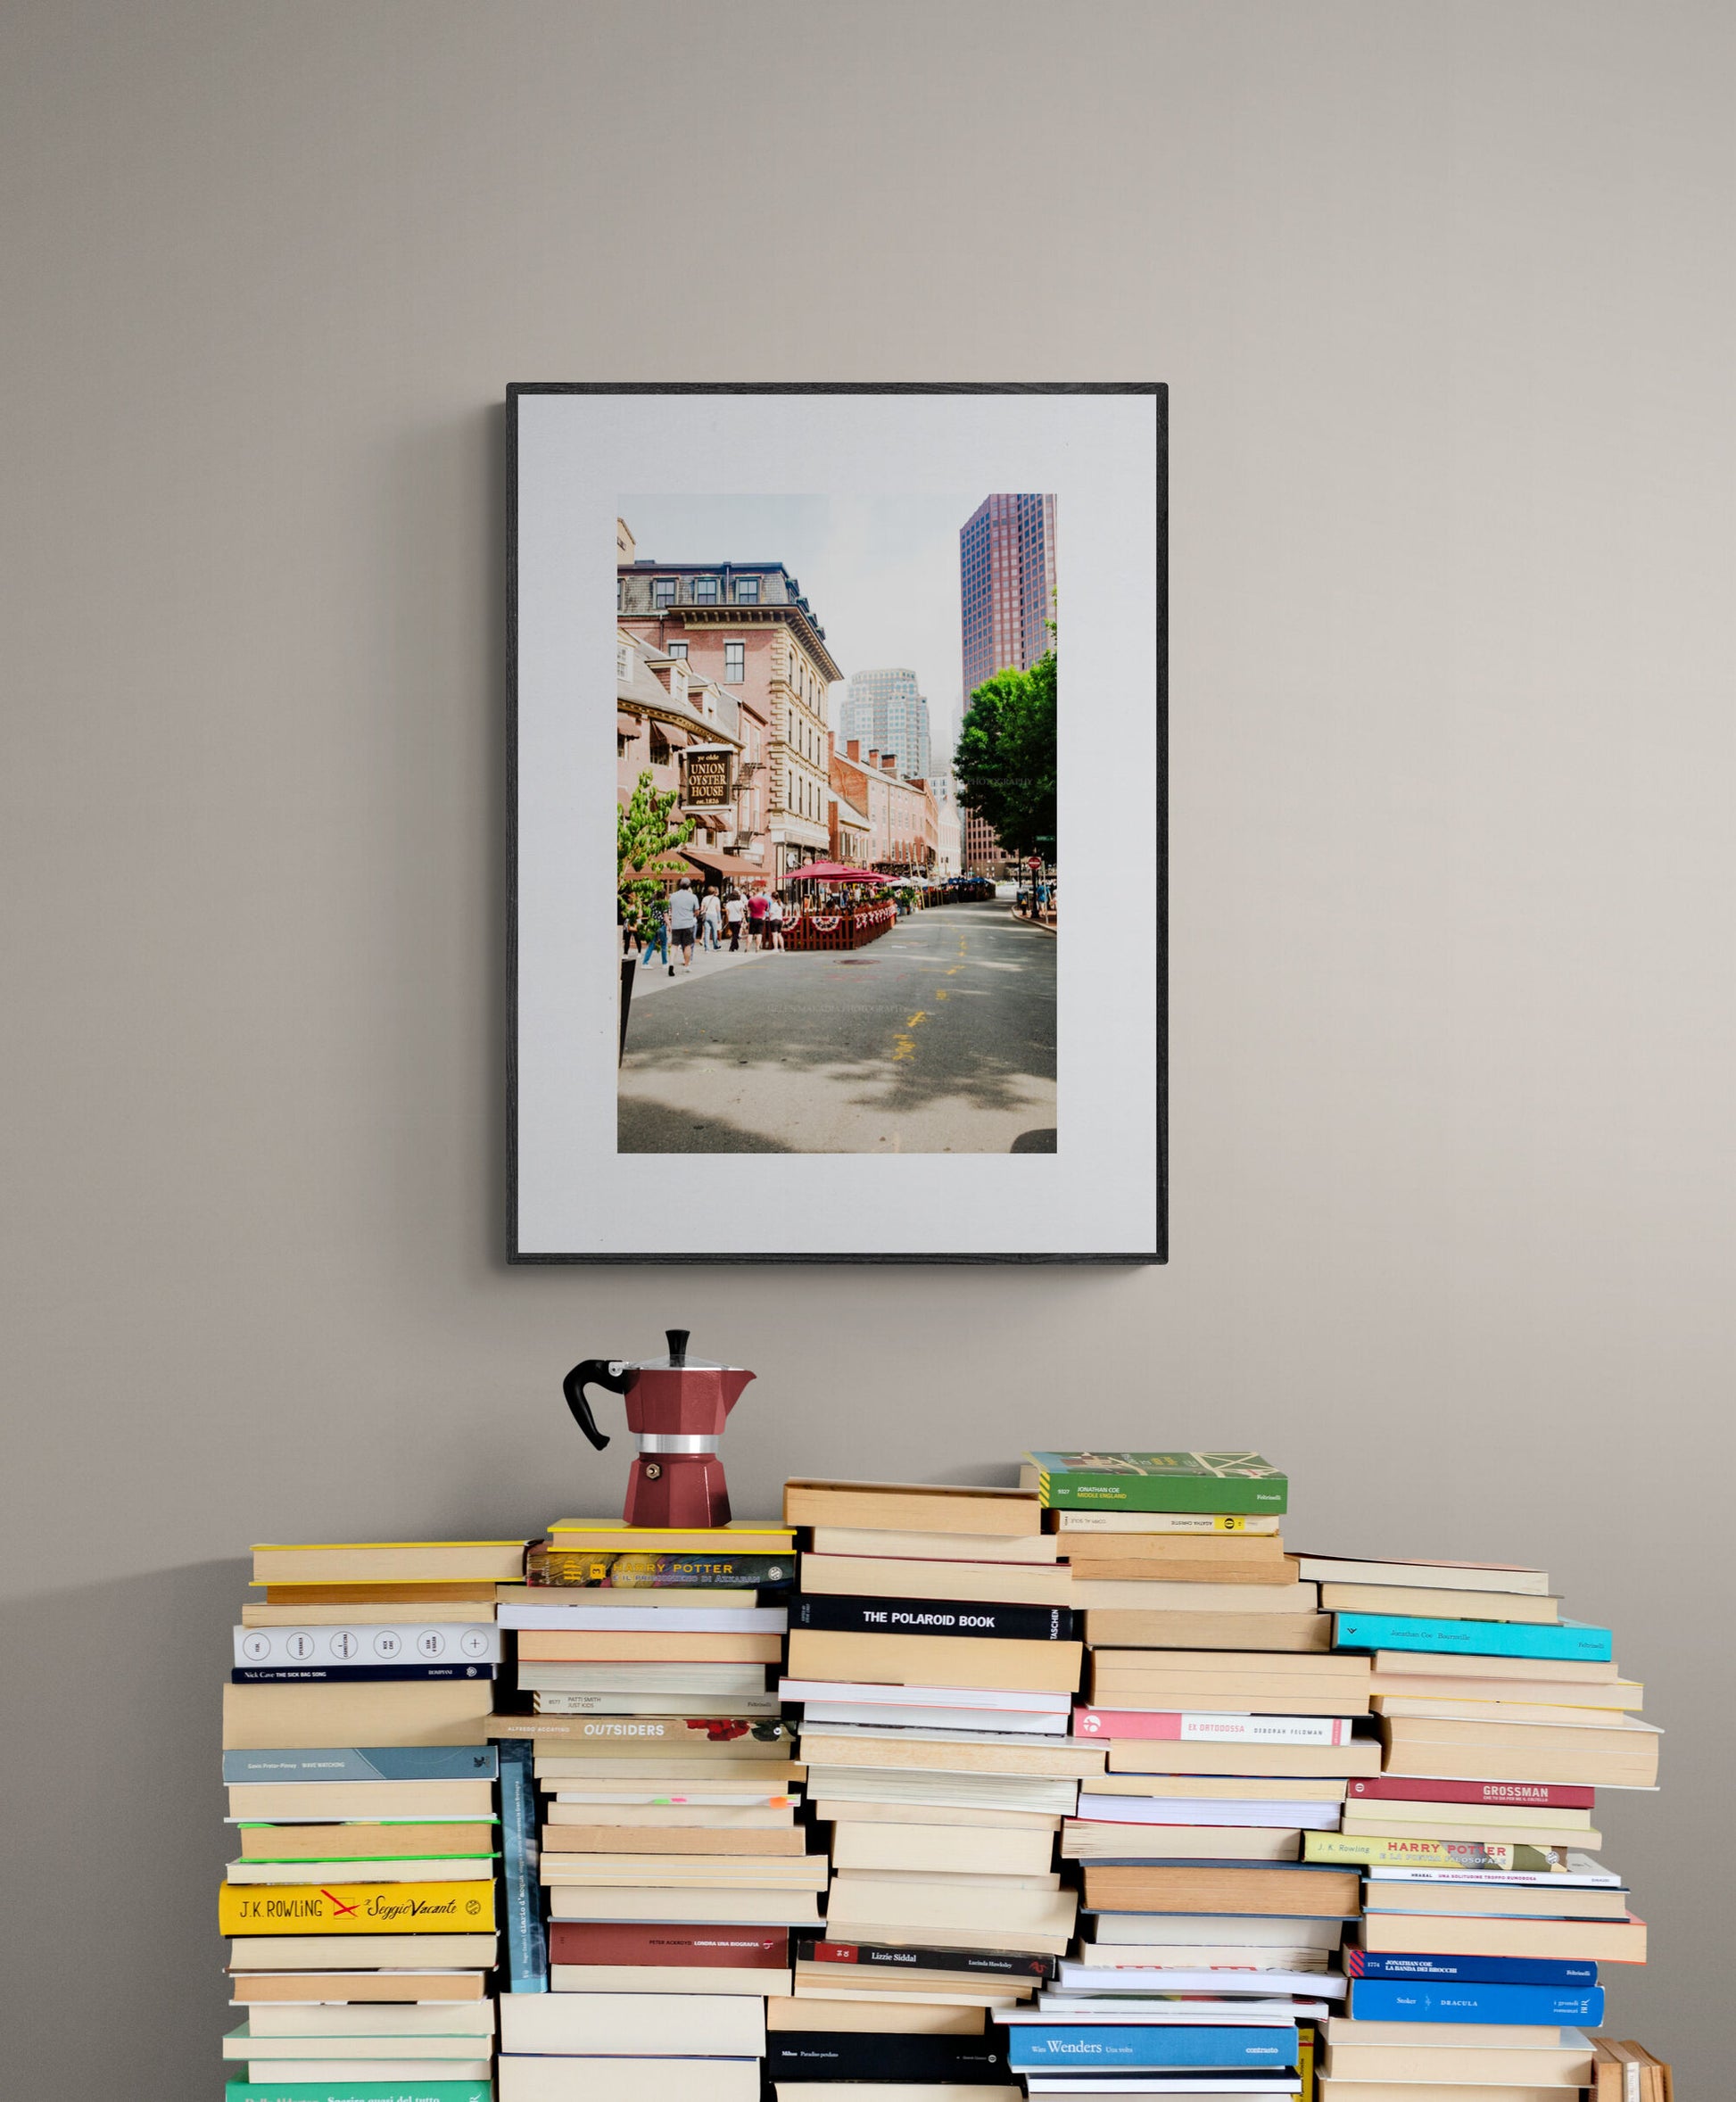 Photograph of Union Oyster House and Union Street in Boston MA in a reading room